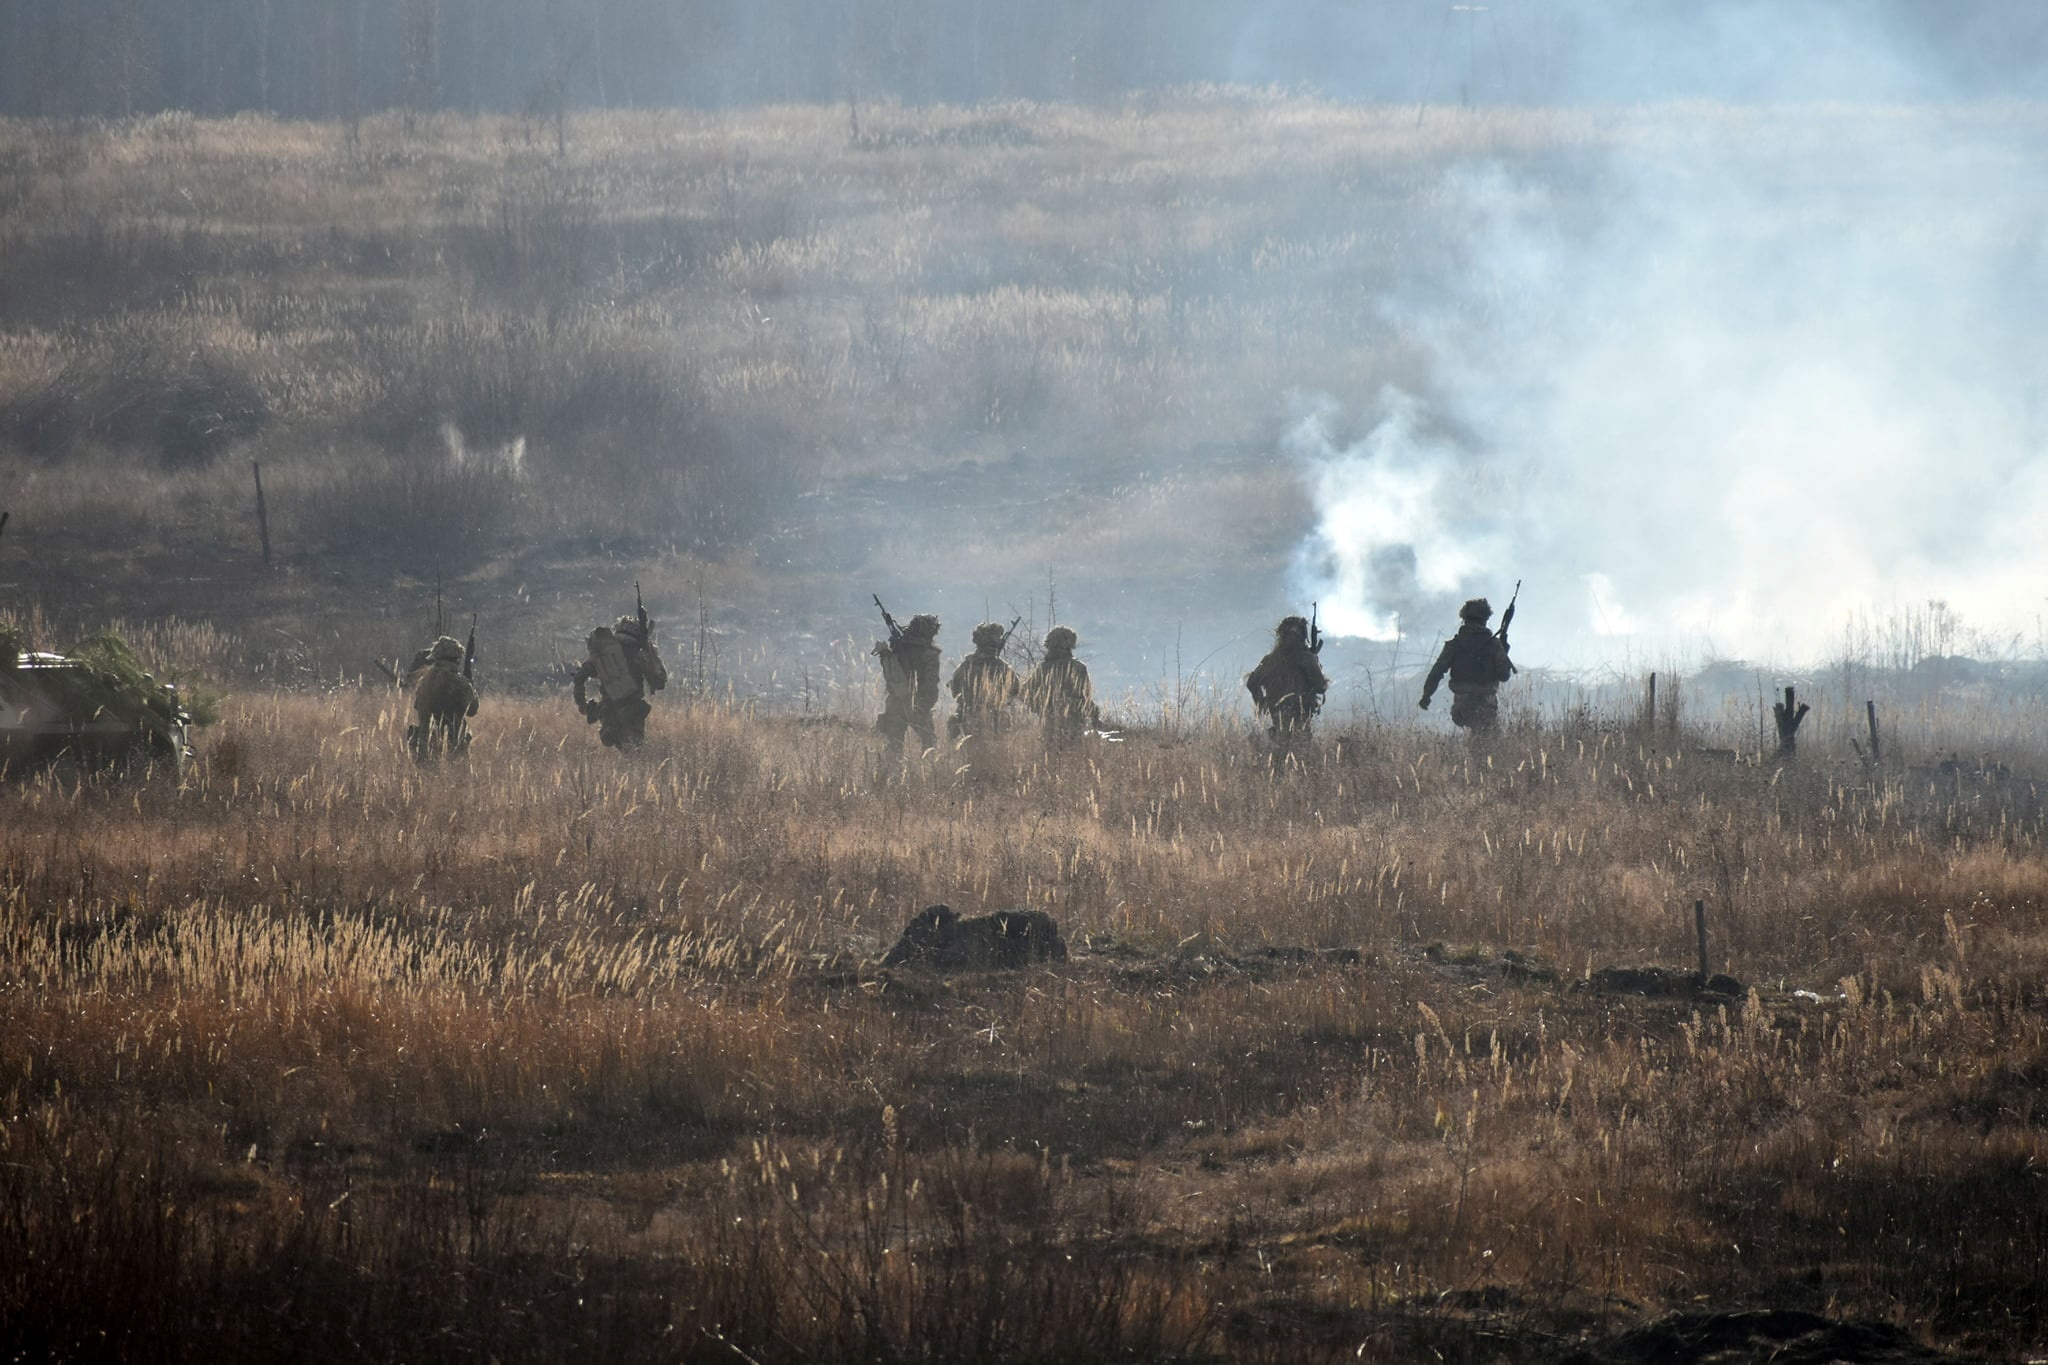 Servicemen of the Ukrainian Air Assault Forces attend military drills in Zhytomyr Region, Ukraine November 21, 2021. Press service of the Ukrainian Air Assault Forces Command/Handout via REUTERS